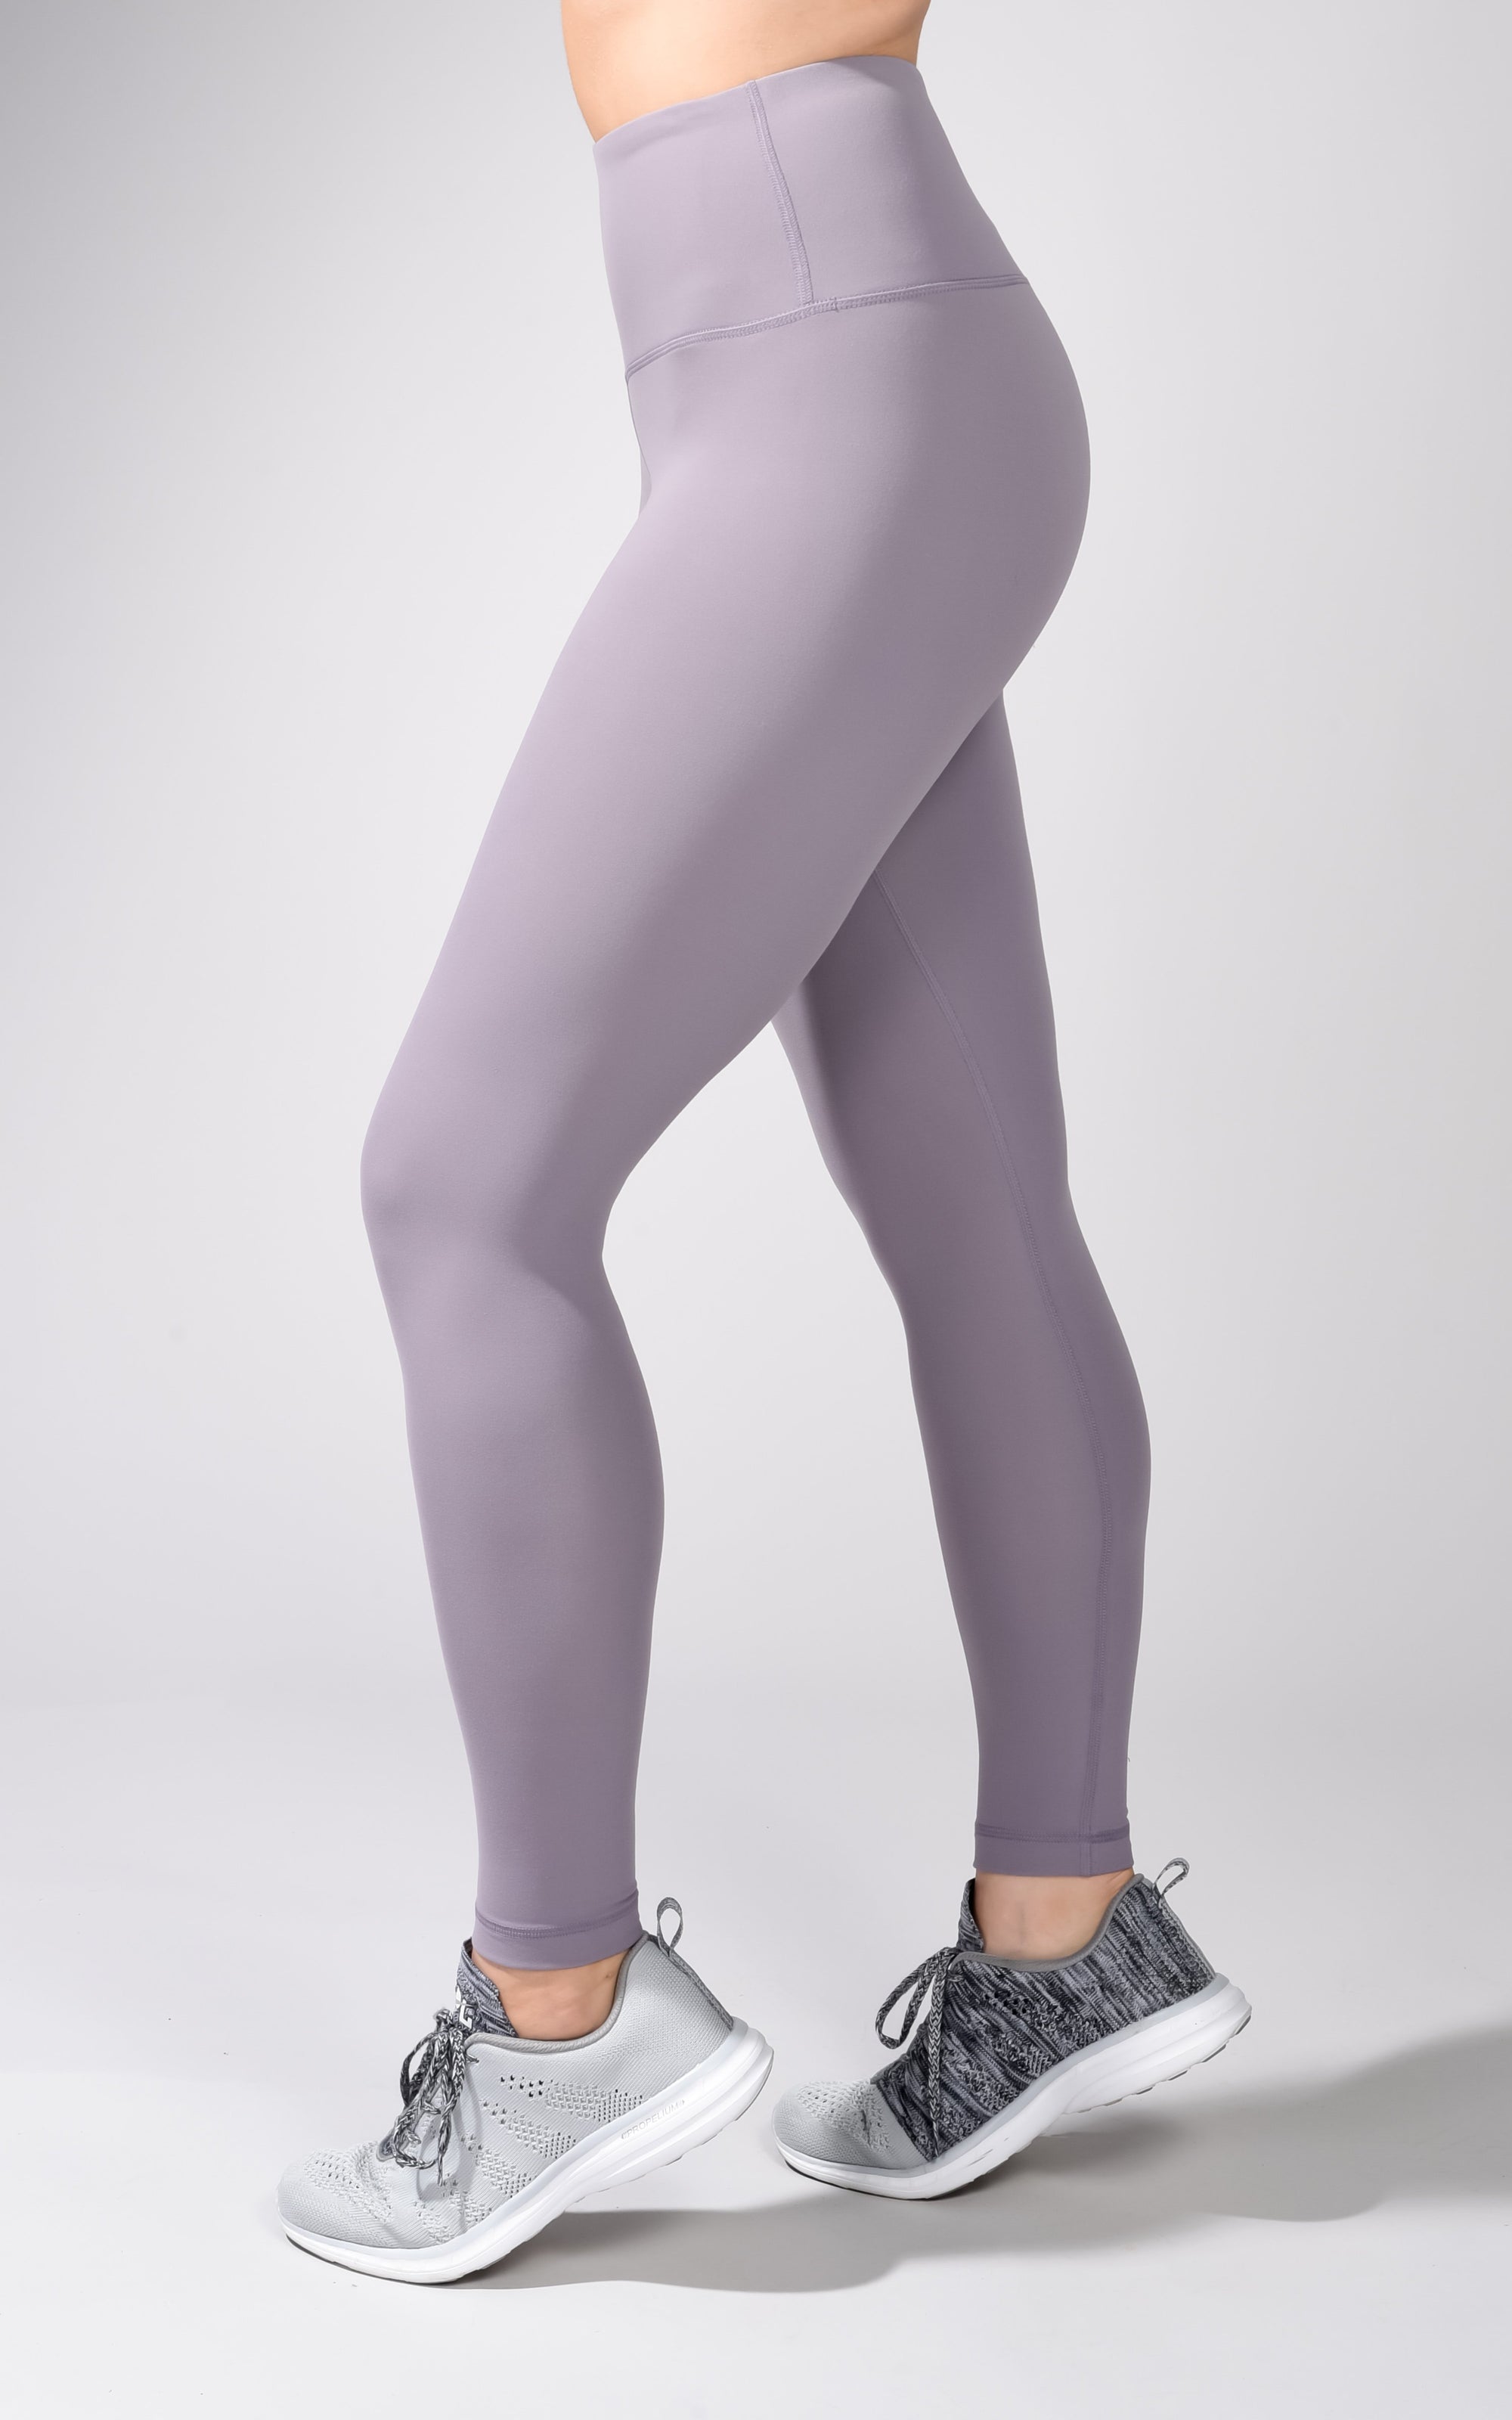 Yogalicious Lux black and grey Capri marble leggings XS with